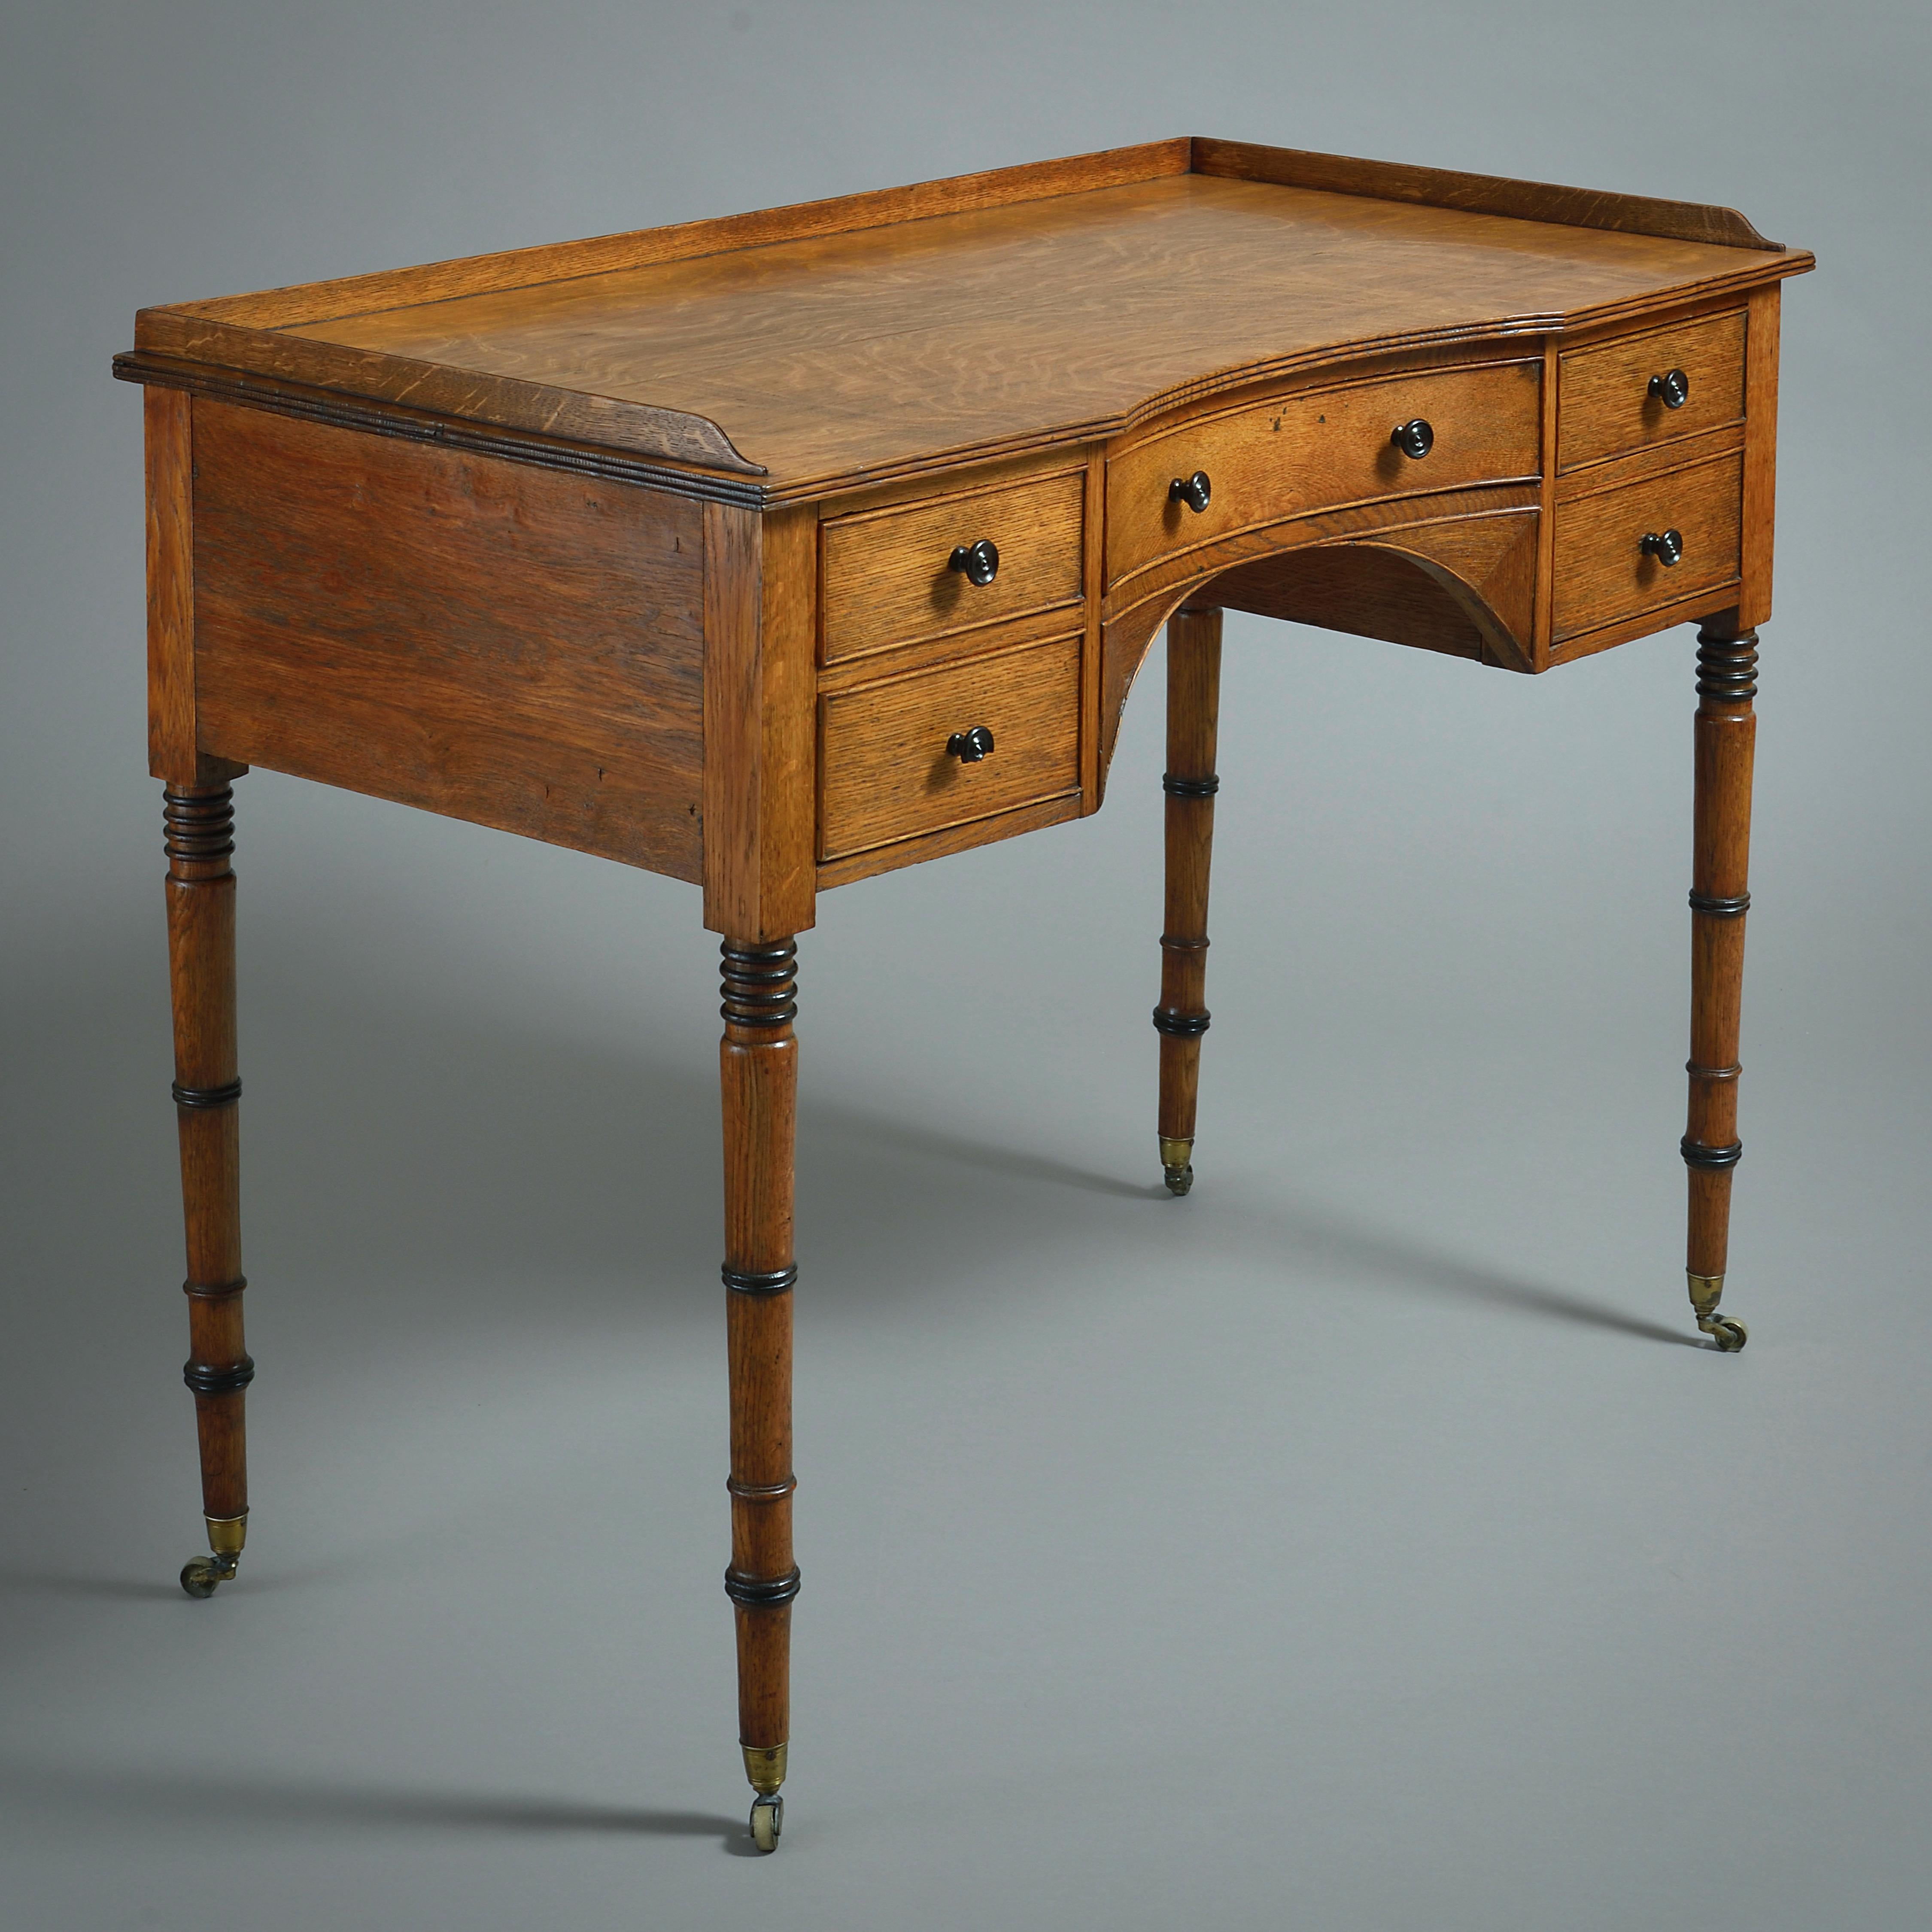 A REGENCY GOLDEN OAK AND PARCEL-EBONISED DRESSING TABLE IN THE MANNER OF GILLOWS, CIRCA 1820.

31.5in. (80cm) high; 42in. (107cm) wide; 21in. (53cm) deep.